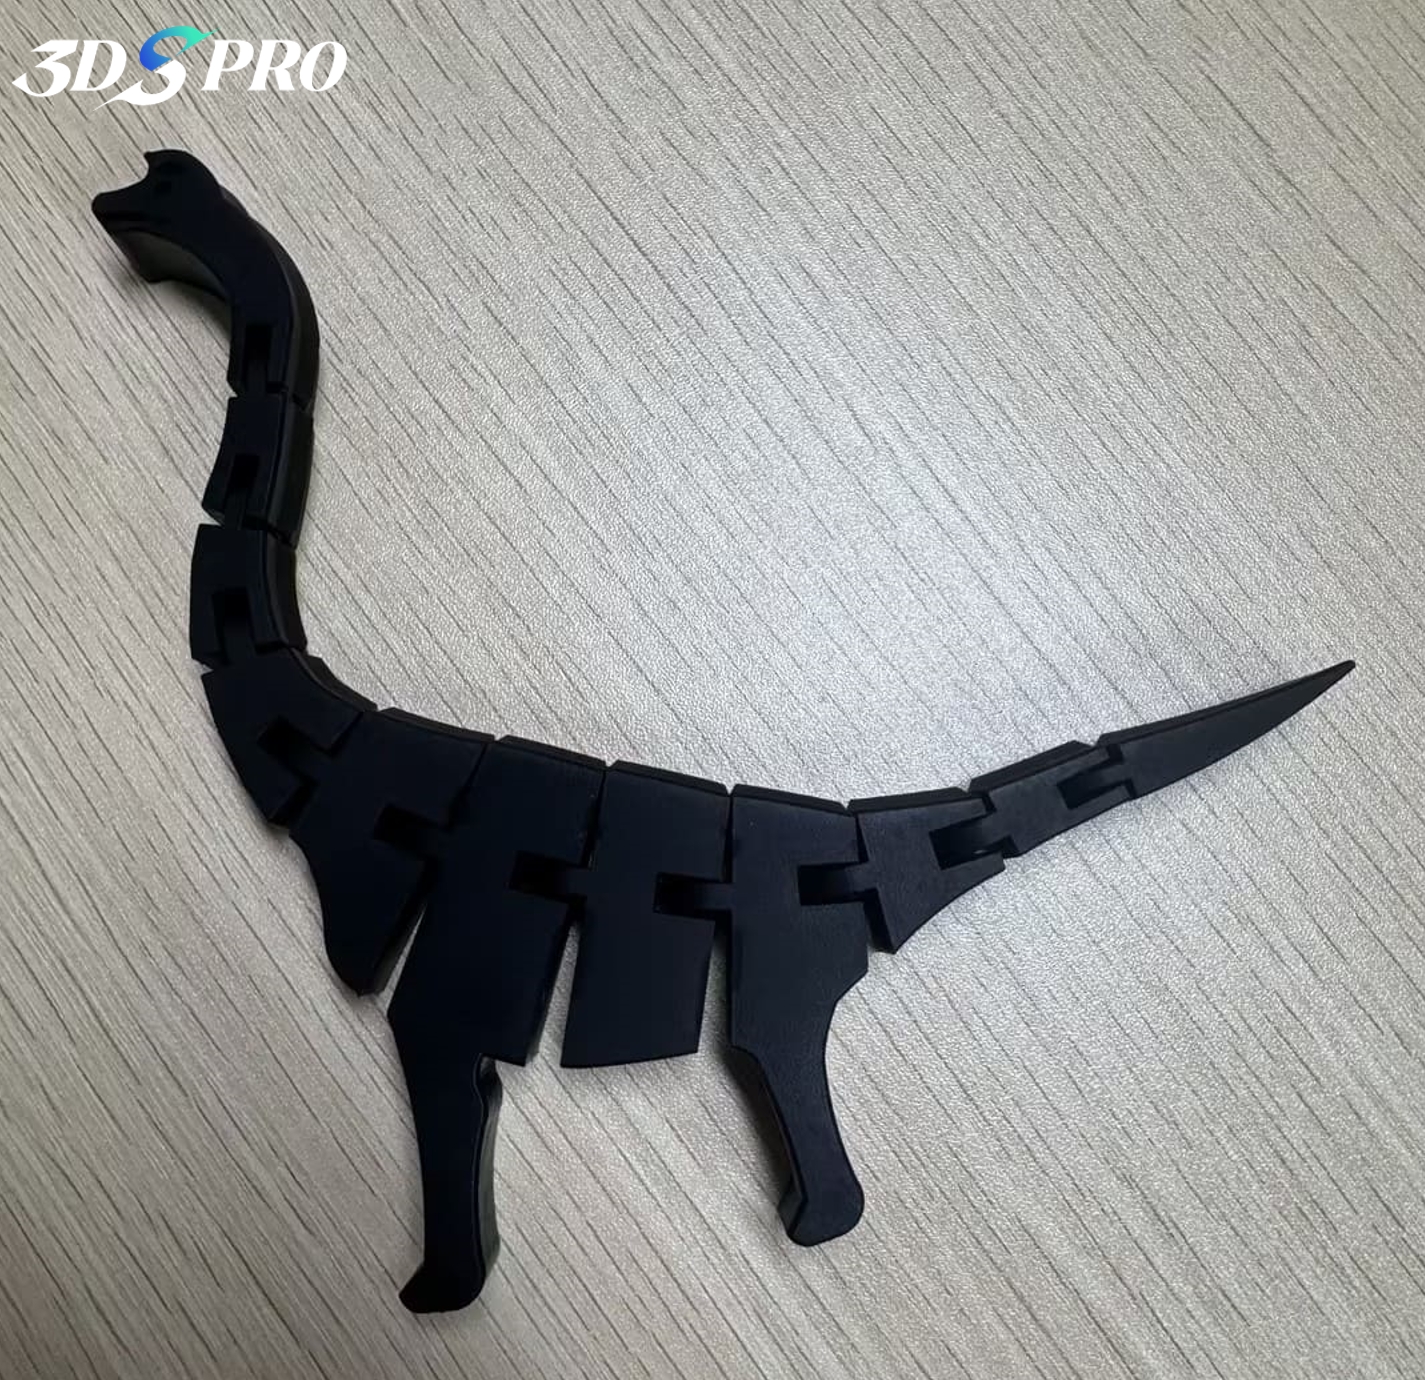 SLA 3D-printed Articulated Dinosaur at 3DSRPO